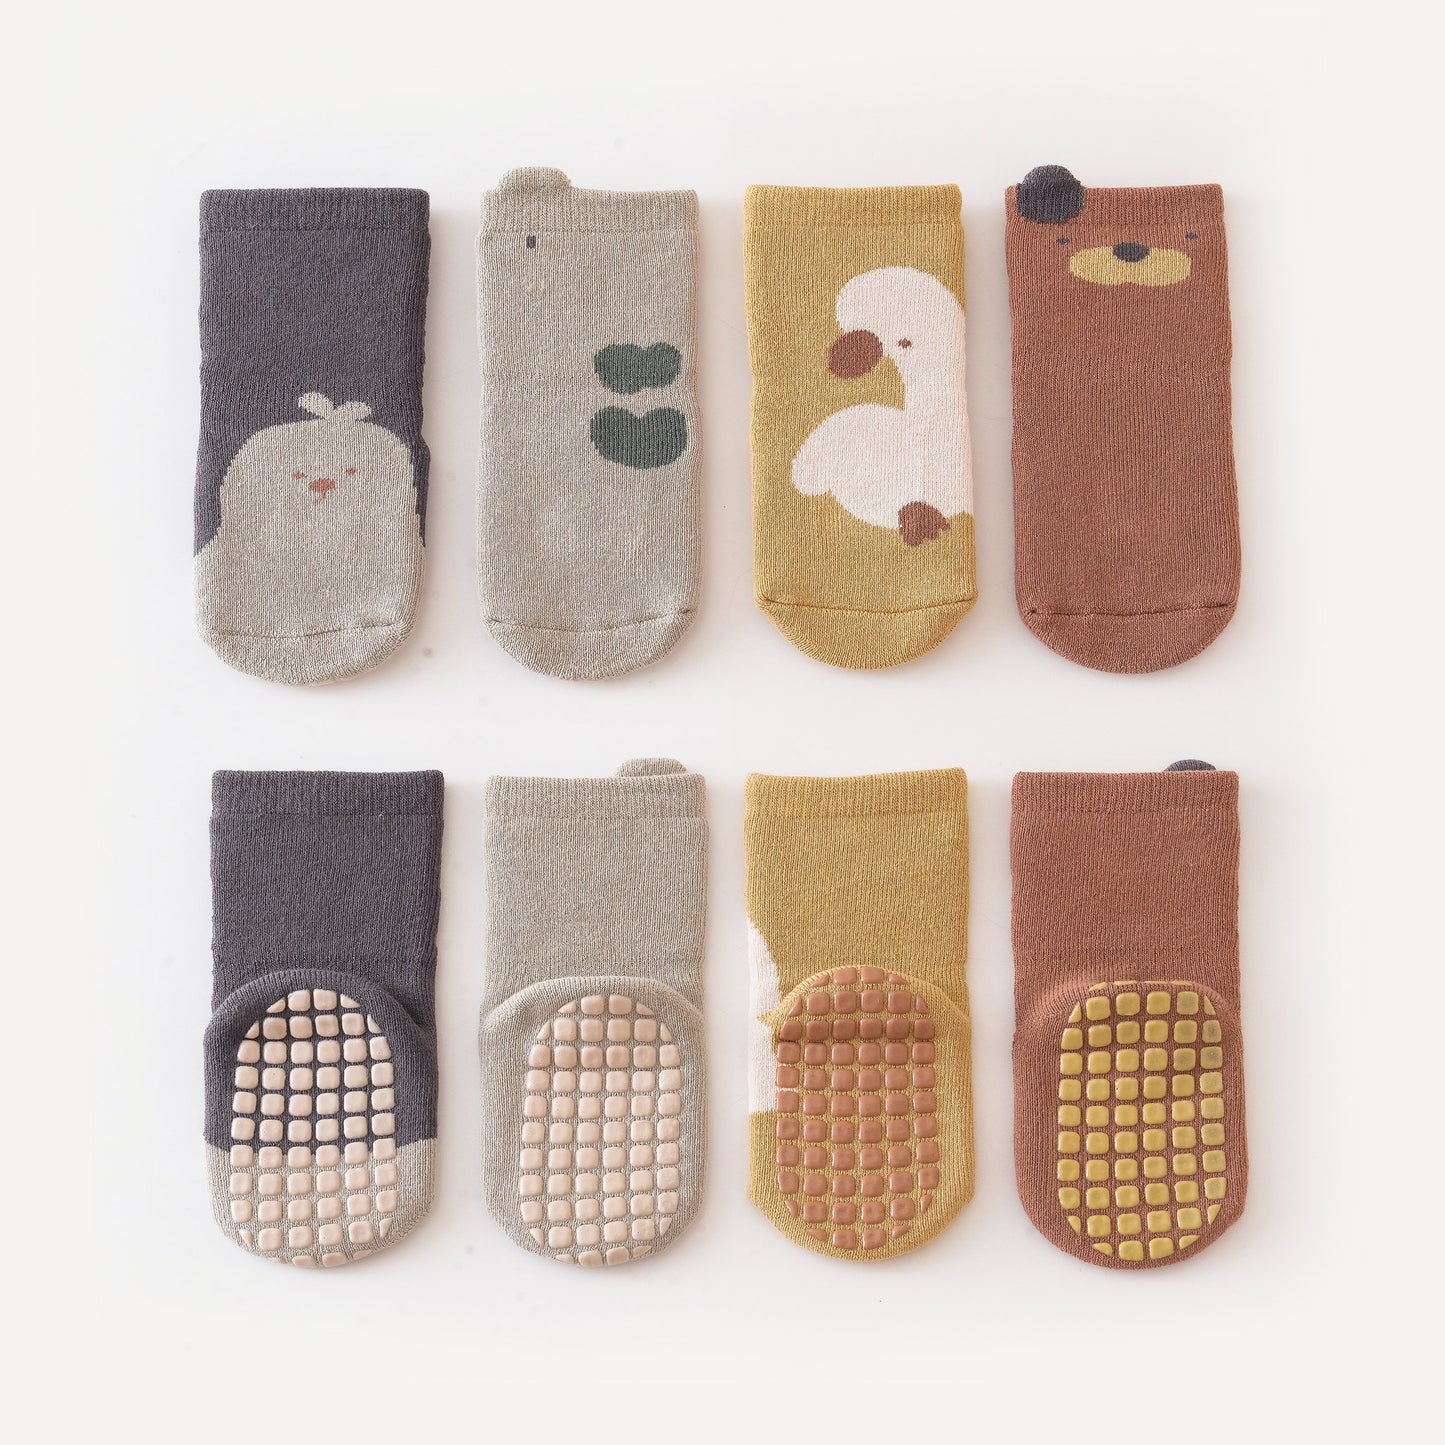 New- Who Am I - Extra Warm - 4 Pairs of Stay-On Baby & Toddler Non-Slip Socks